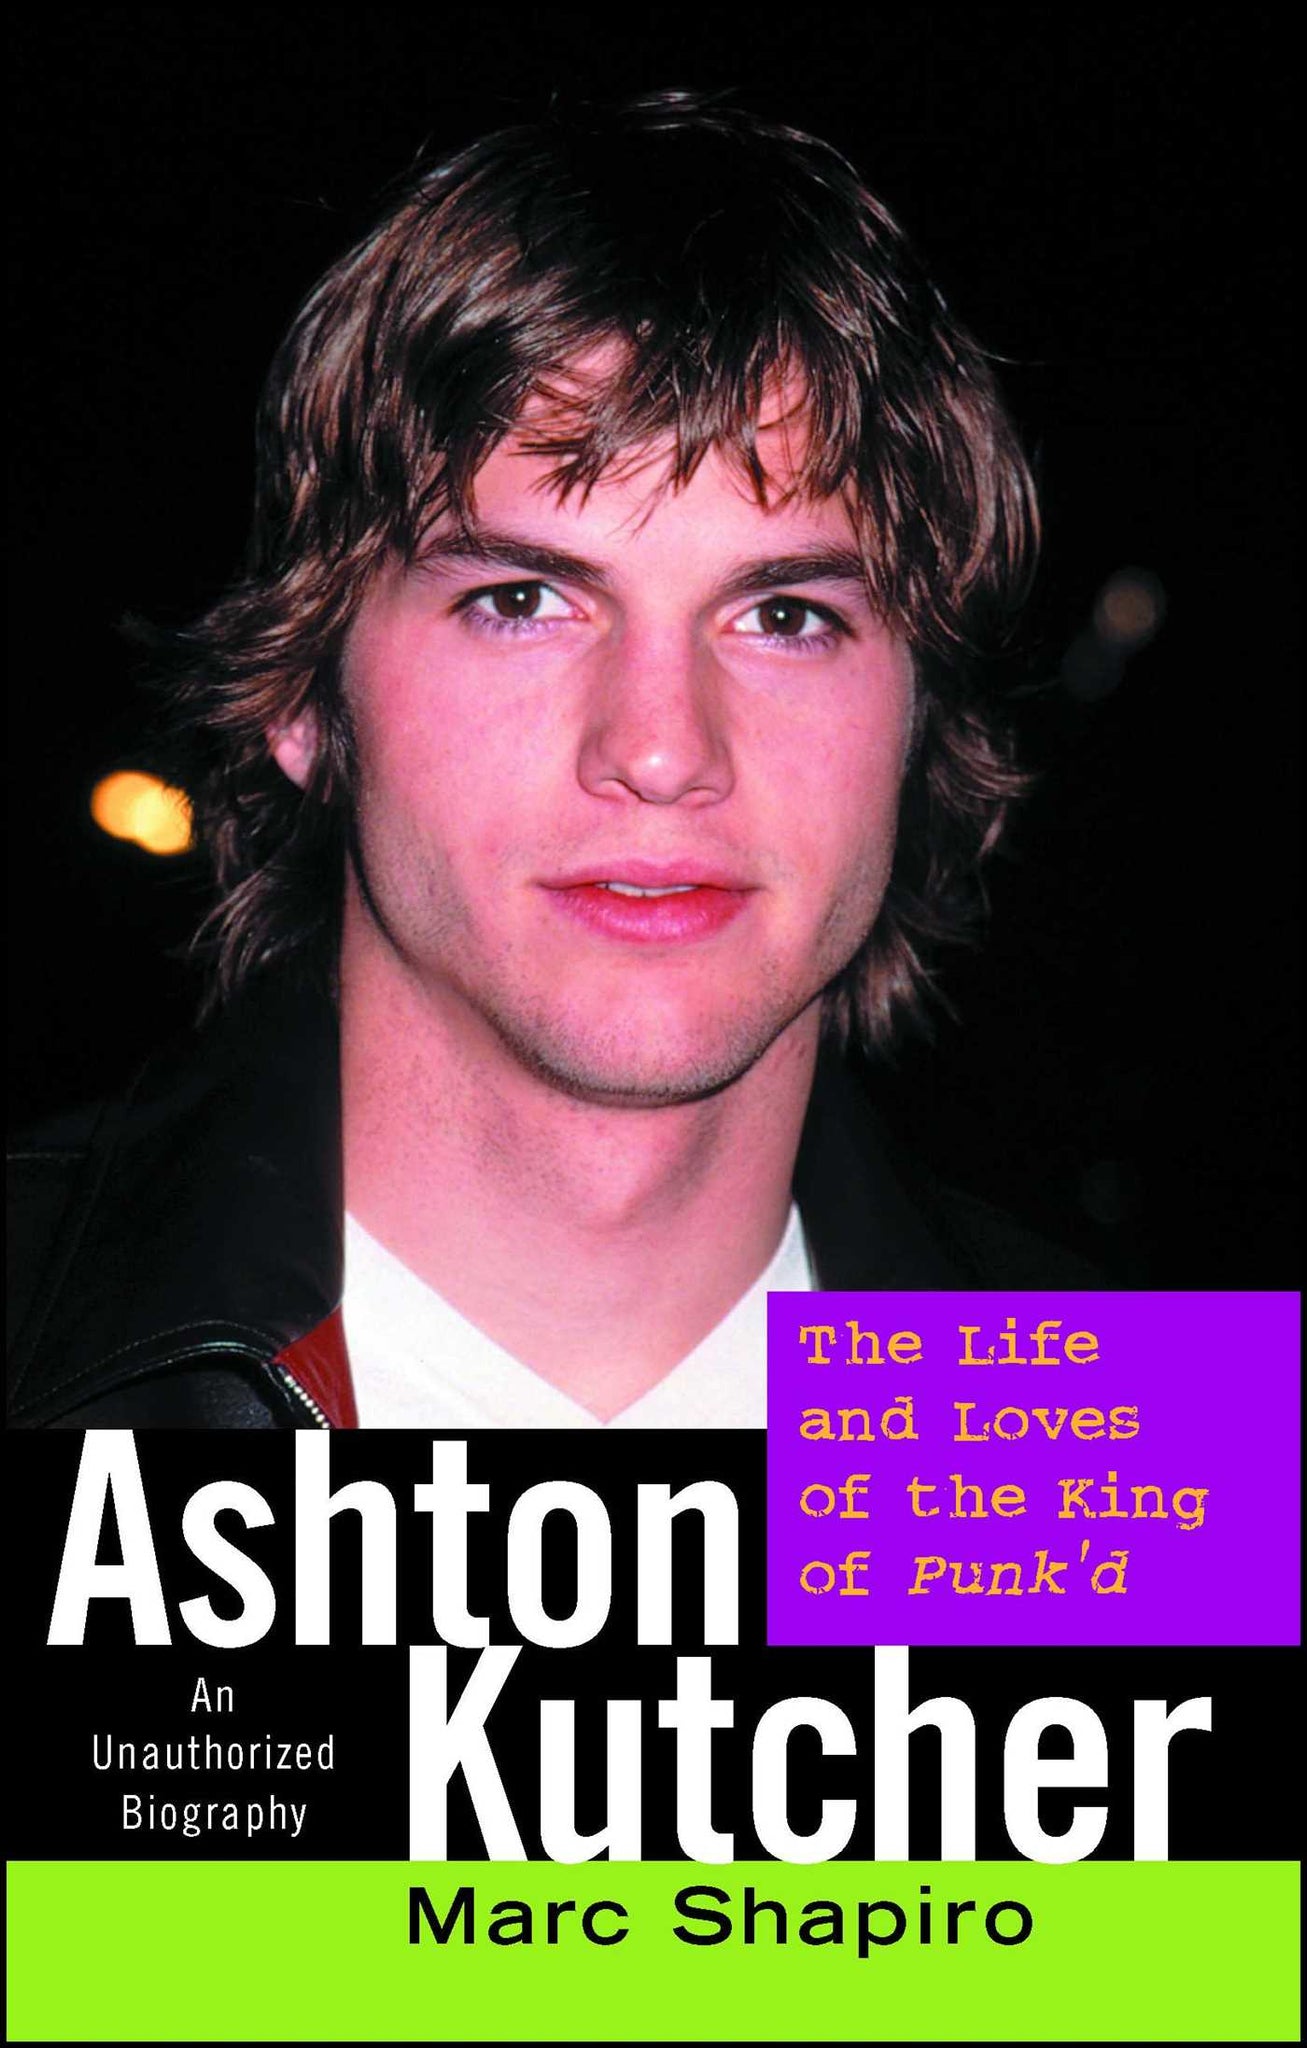 Ashton Kutcher : The Life and Loves of the King of Punk'd